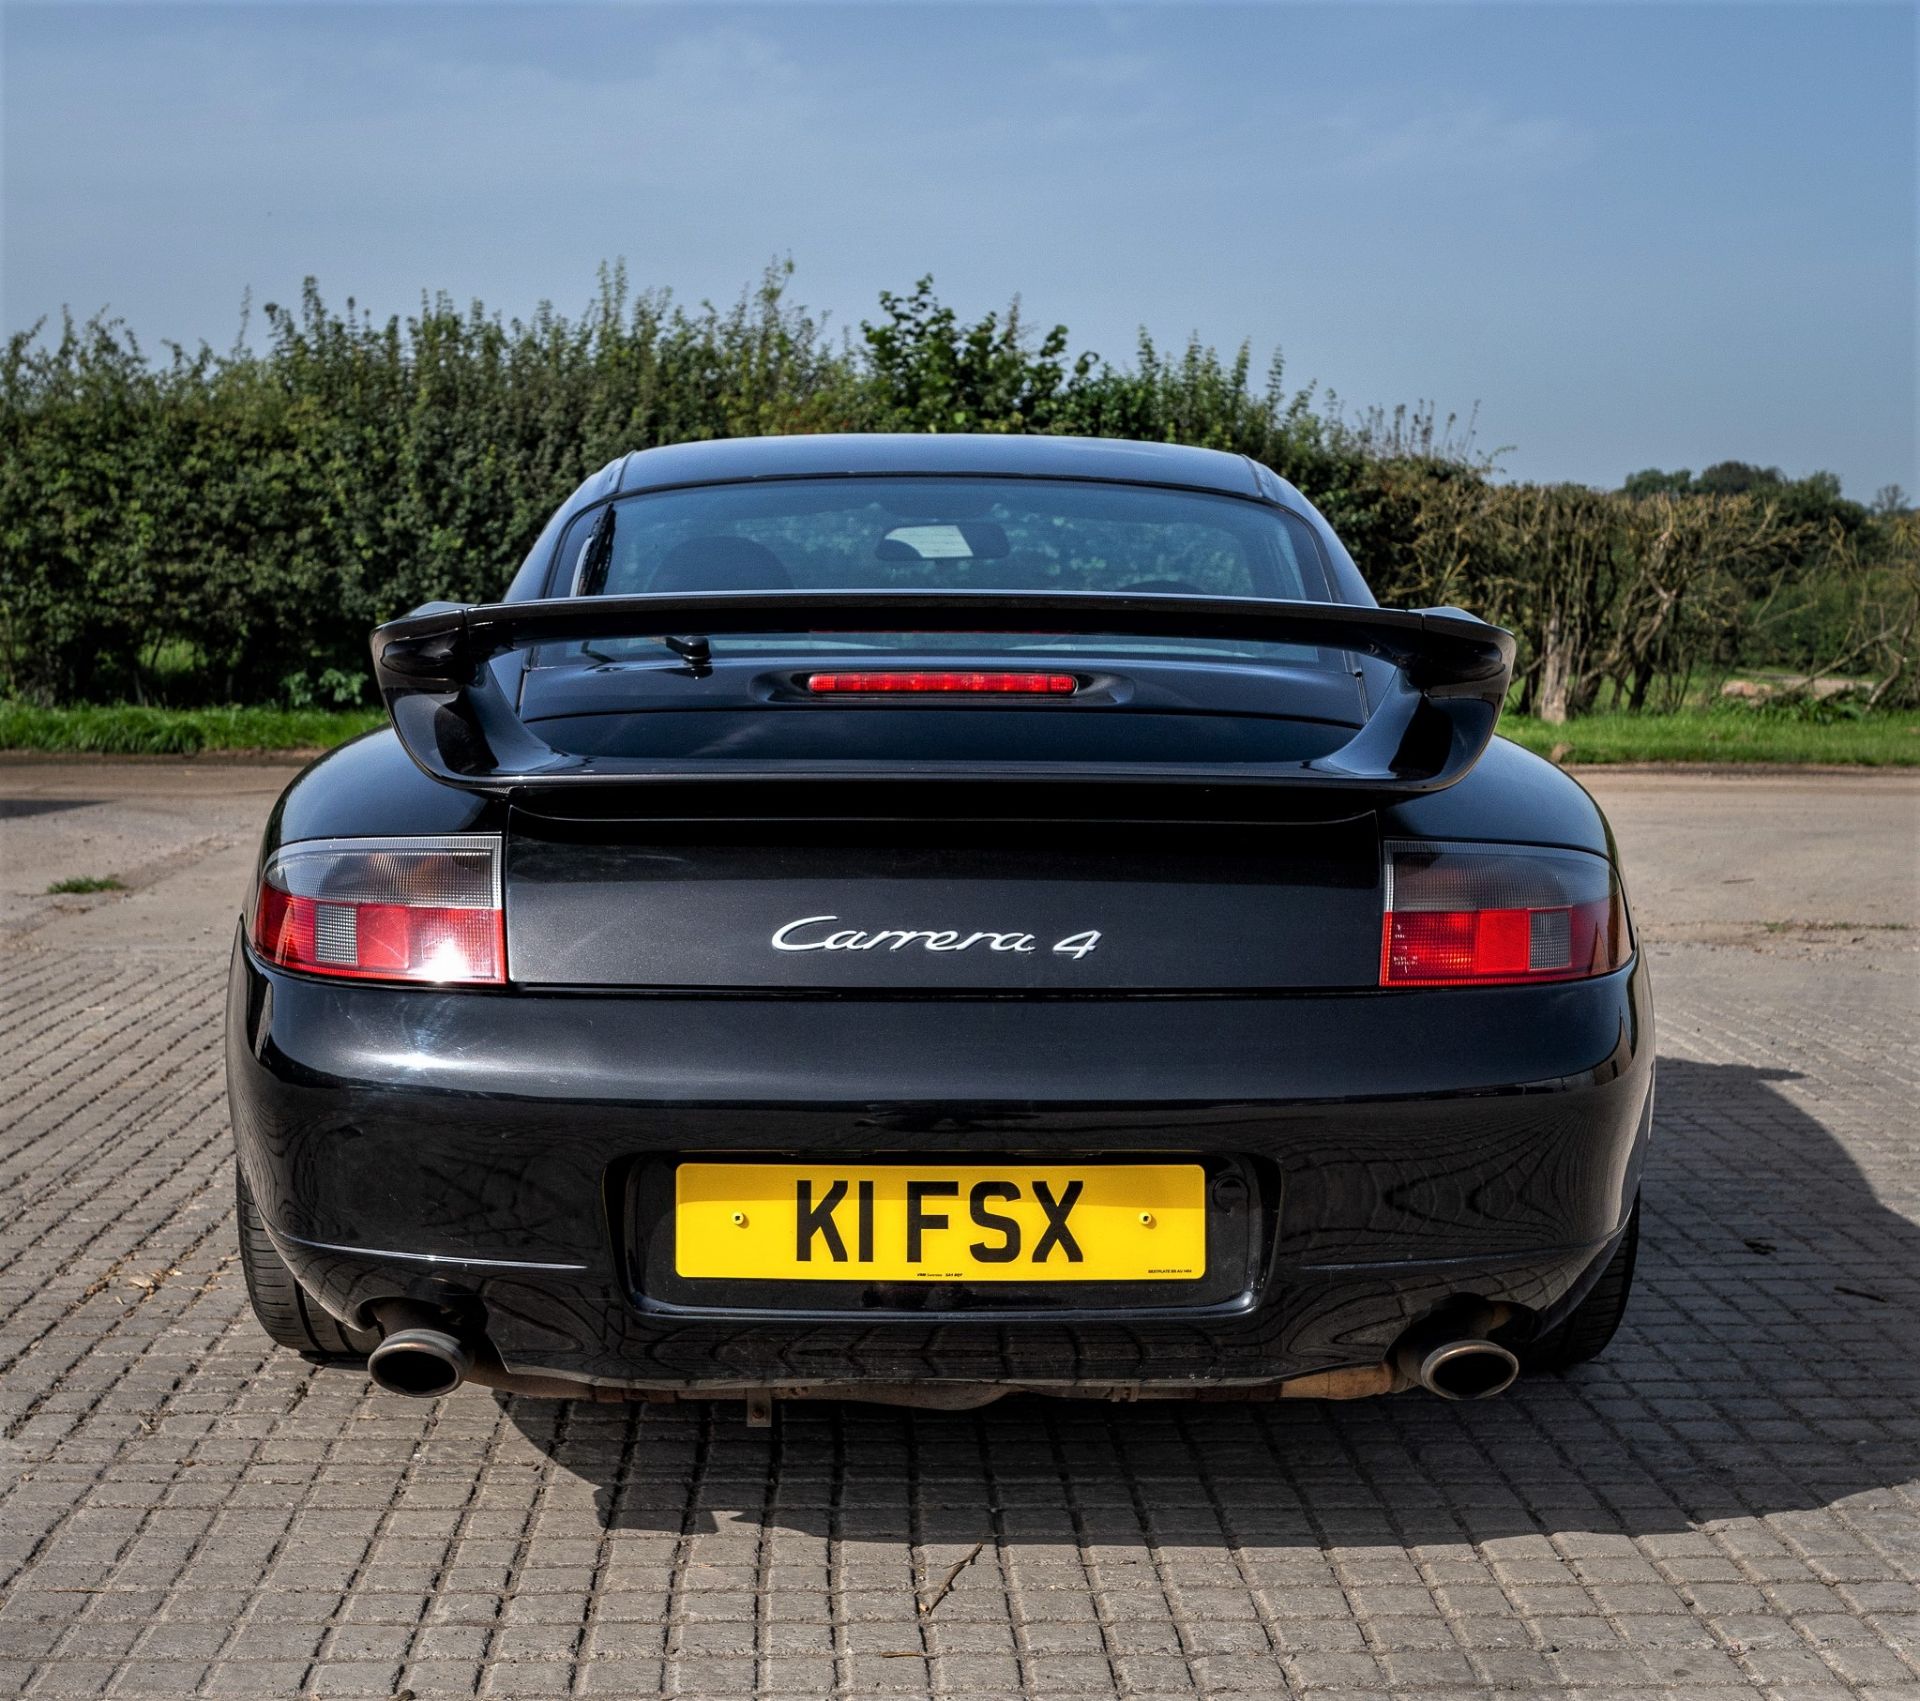 1999 PORSCHE 996 CARRERA 4 COUPE Registration Number: K1 FSX Chassis Number:  WPOZZZ99ZXS602796 - - Image 5 of 15